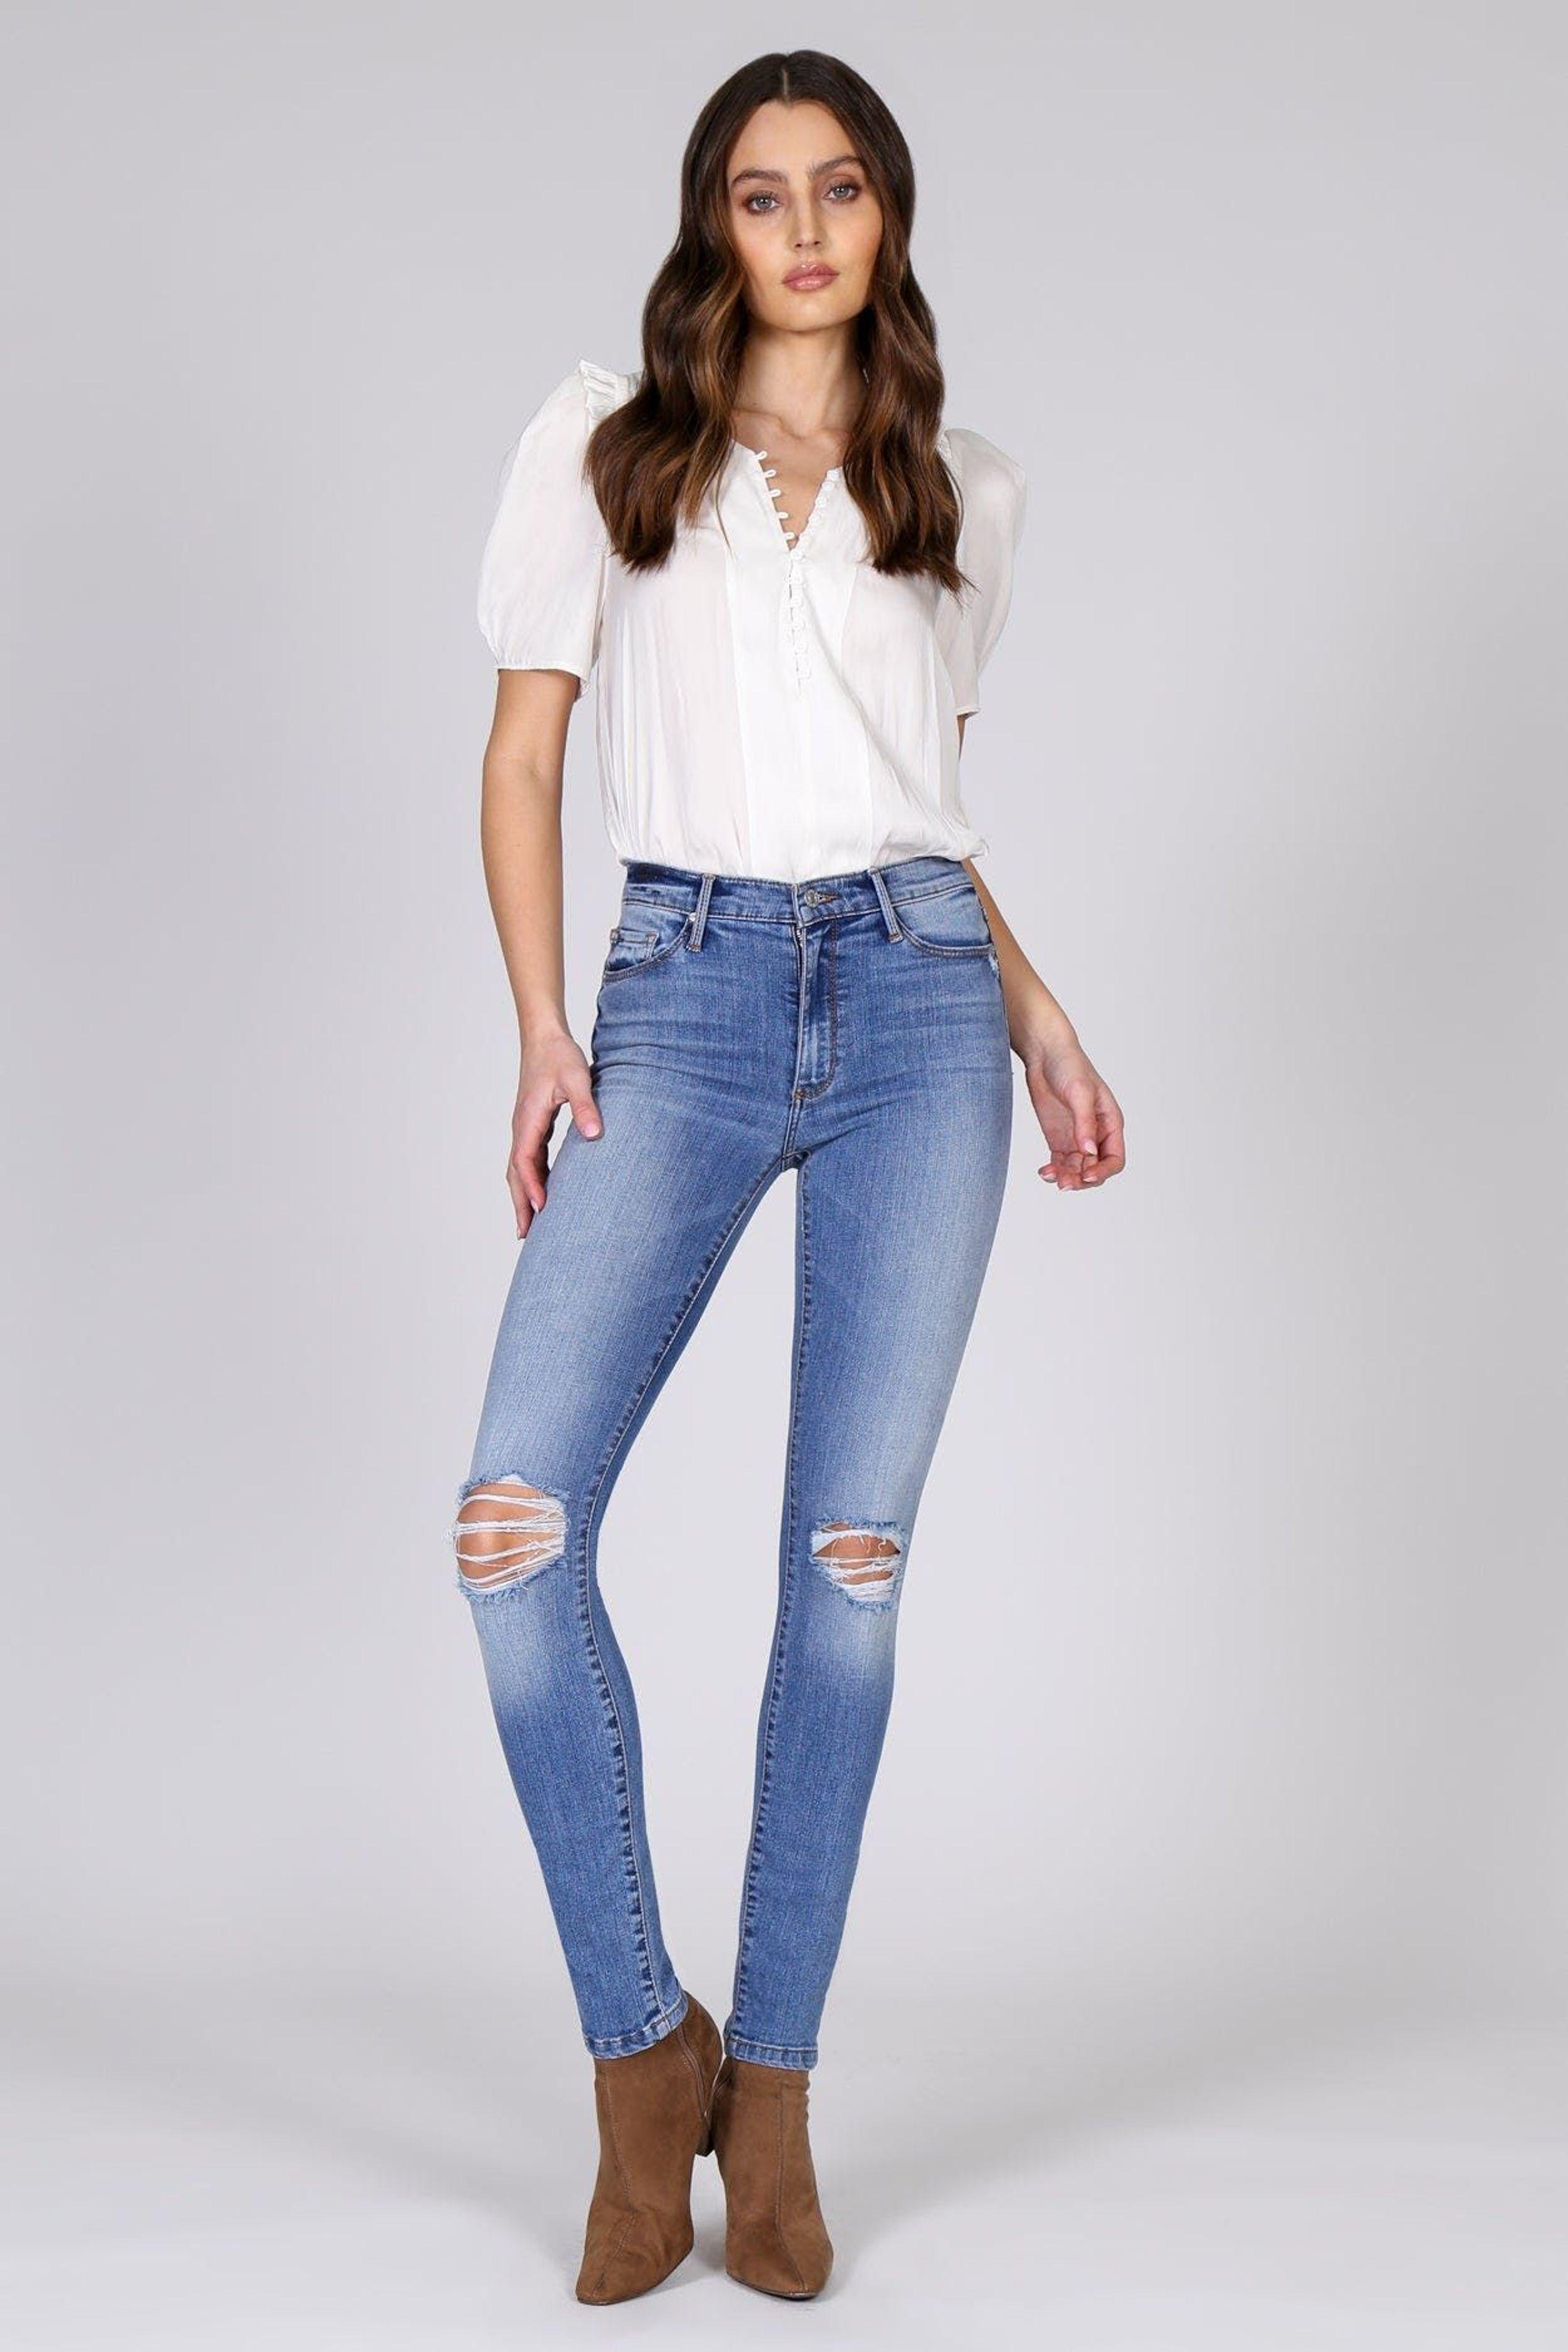 Black Orchid Gisele High Rise Skinny Jeans in Blue | Lyst